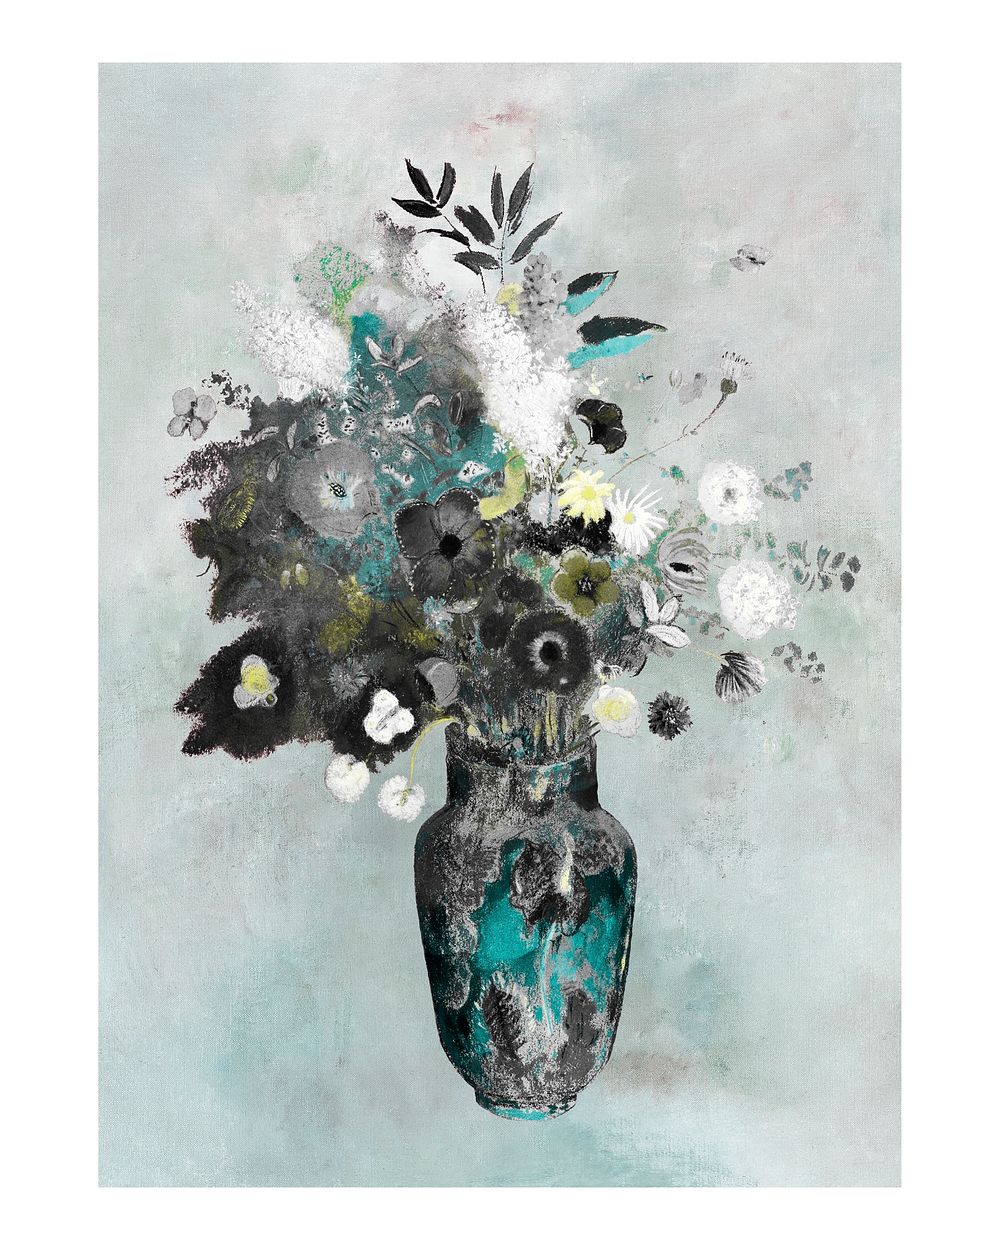 Bouquet in turquoise Chinese vase vintage illustration, remix from original artwork.